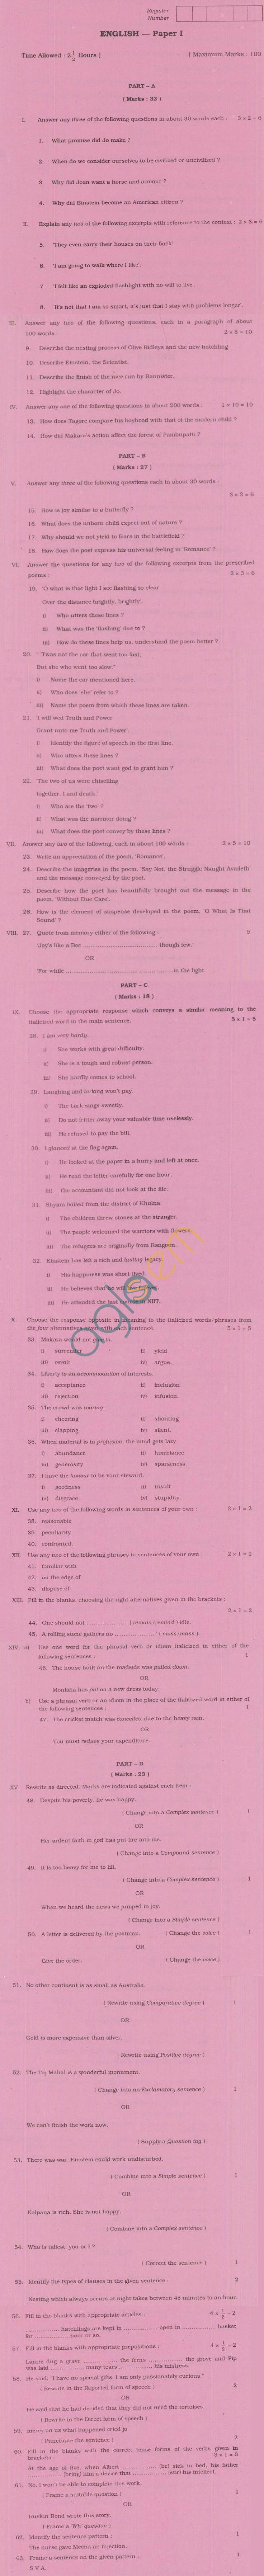 TN Board Matriculation English Question Papers March 2011